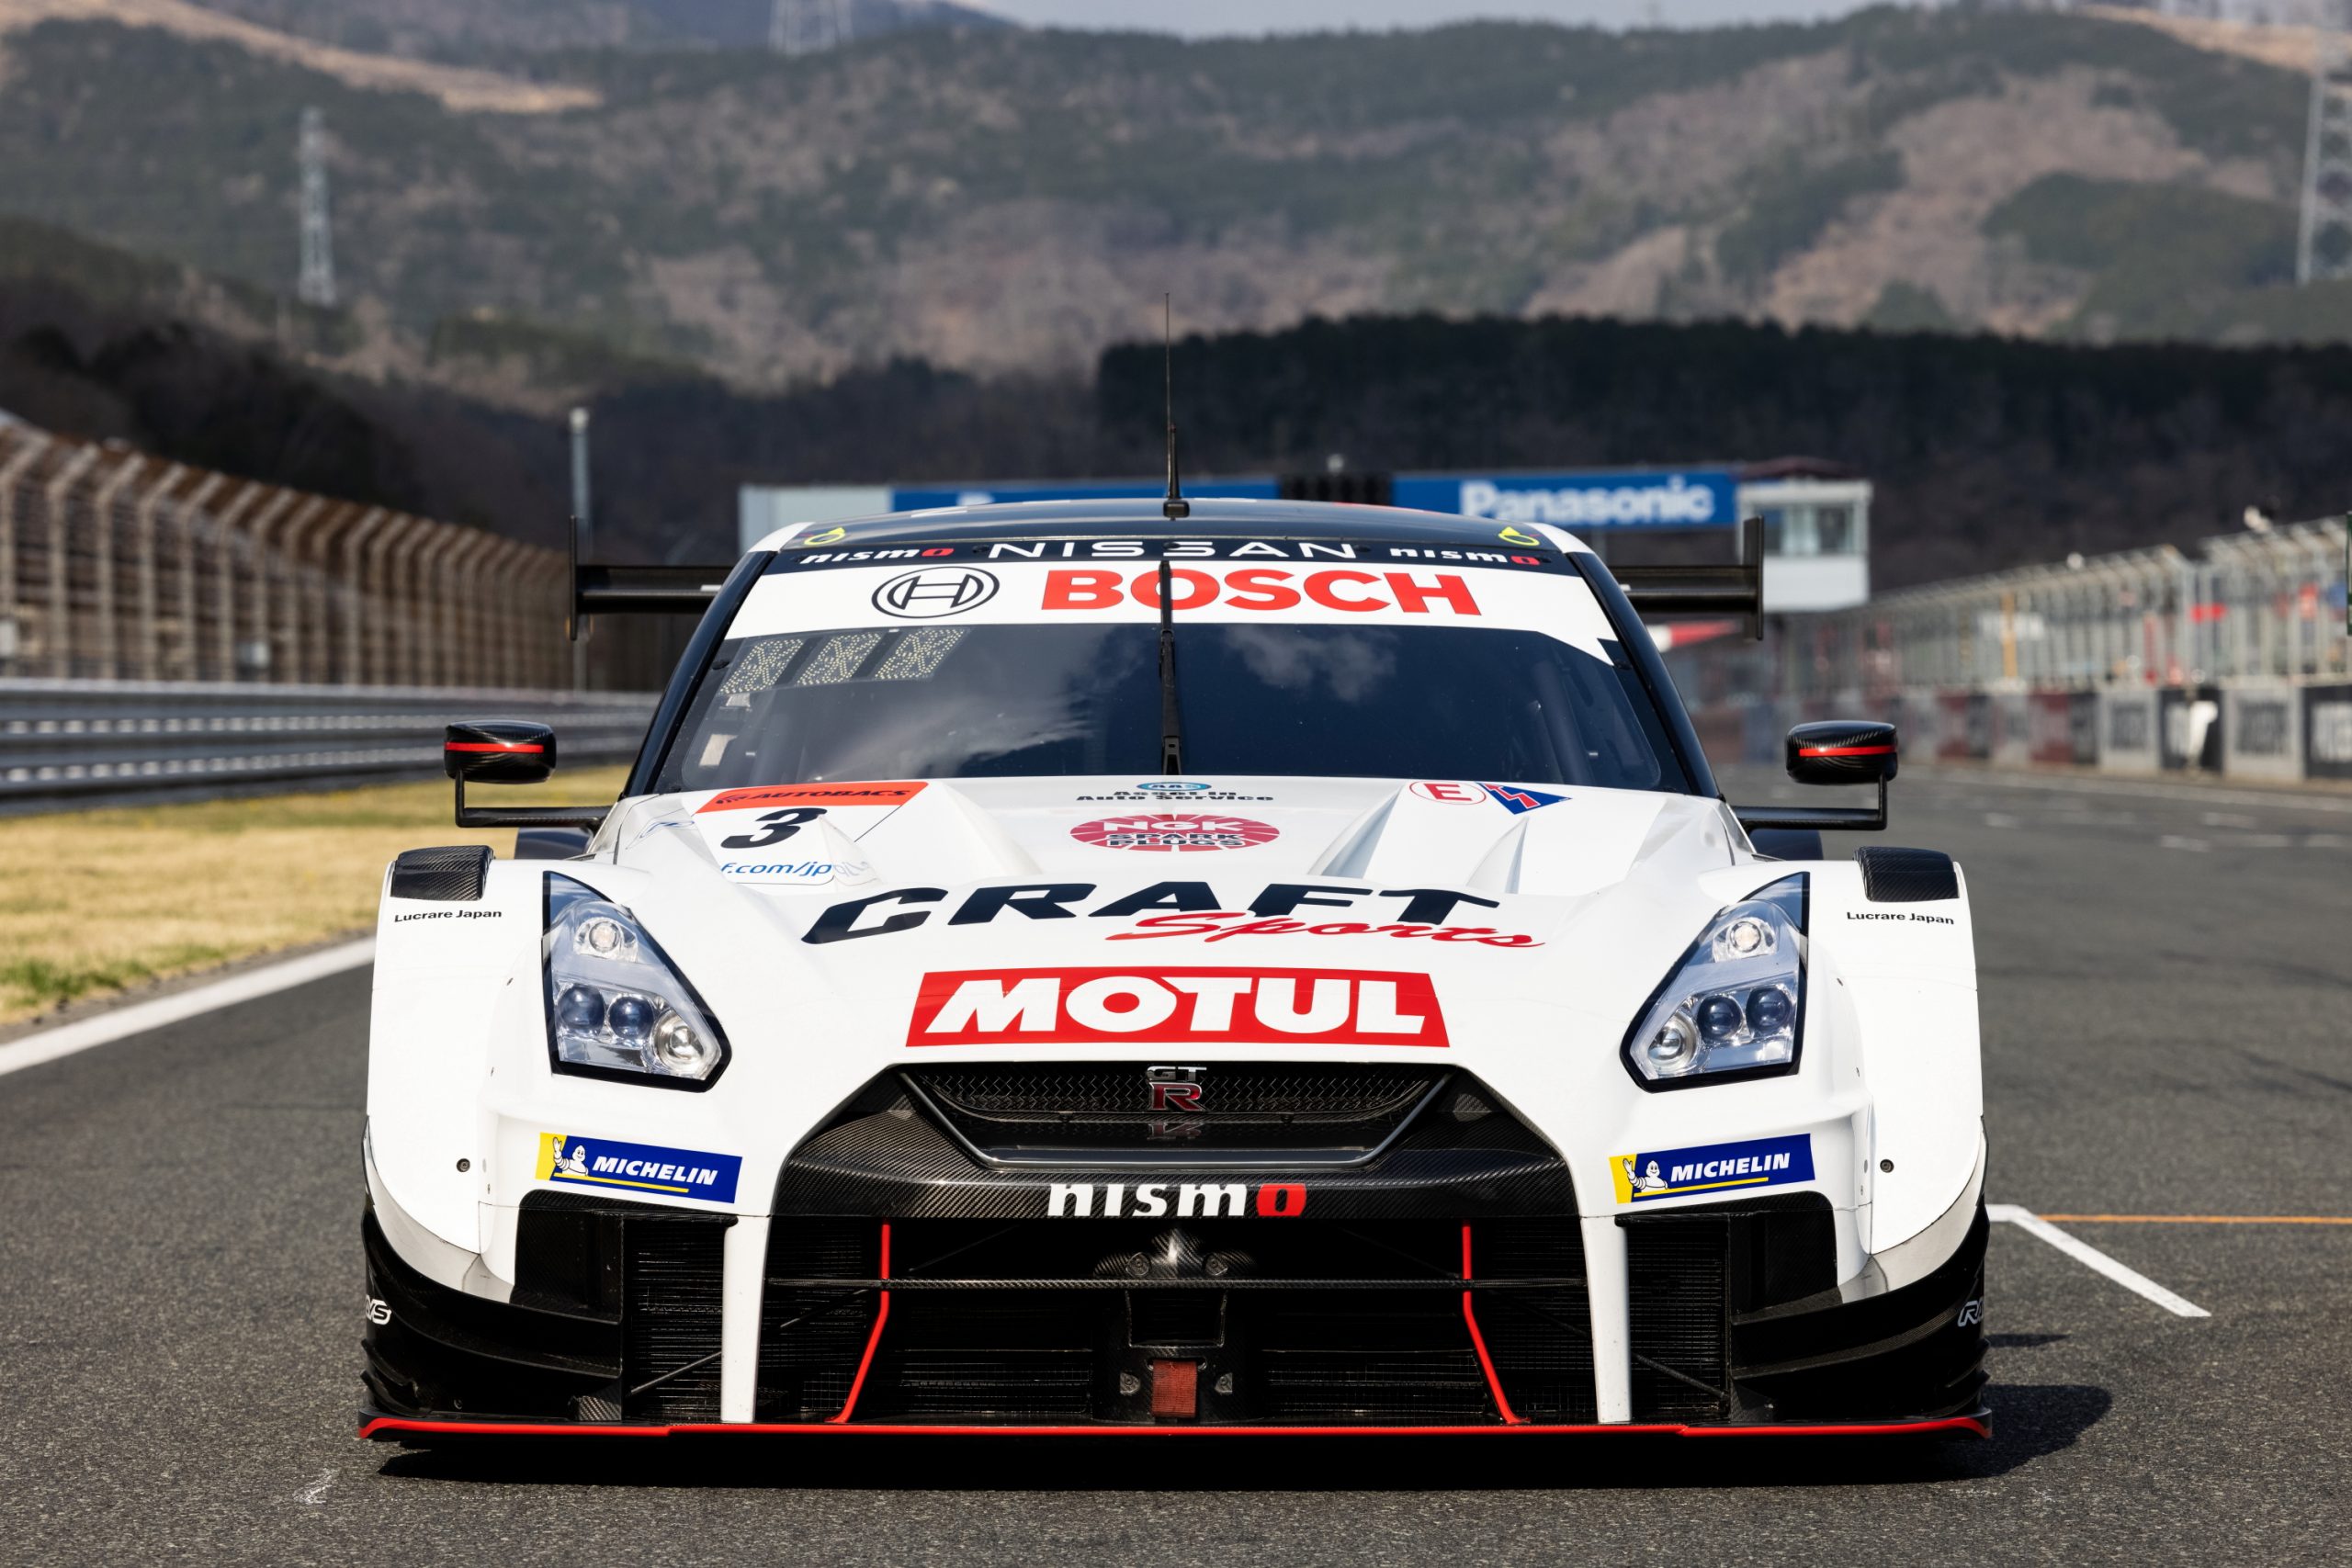 Nismo Nissan GT R NiSMO GT R R35 GT R Race Cars Race Tracks Livery Super GT White Cars Frontal View 2560x1707